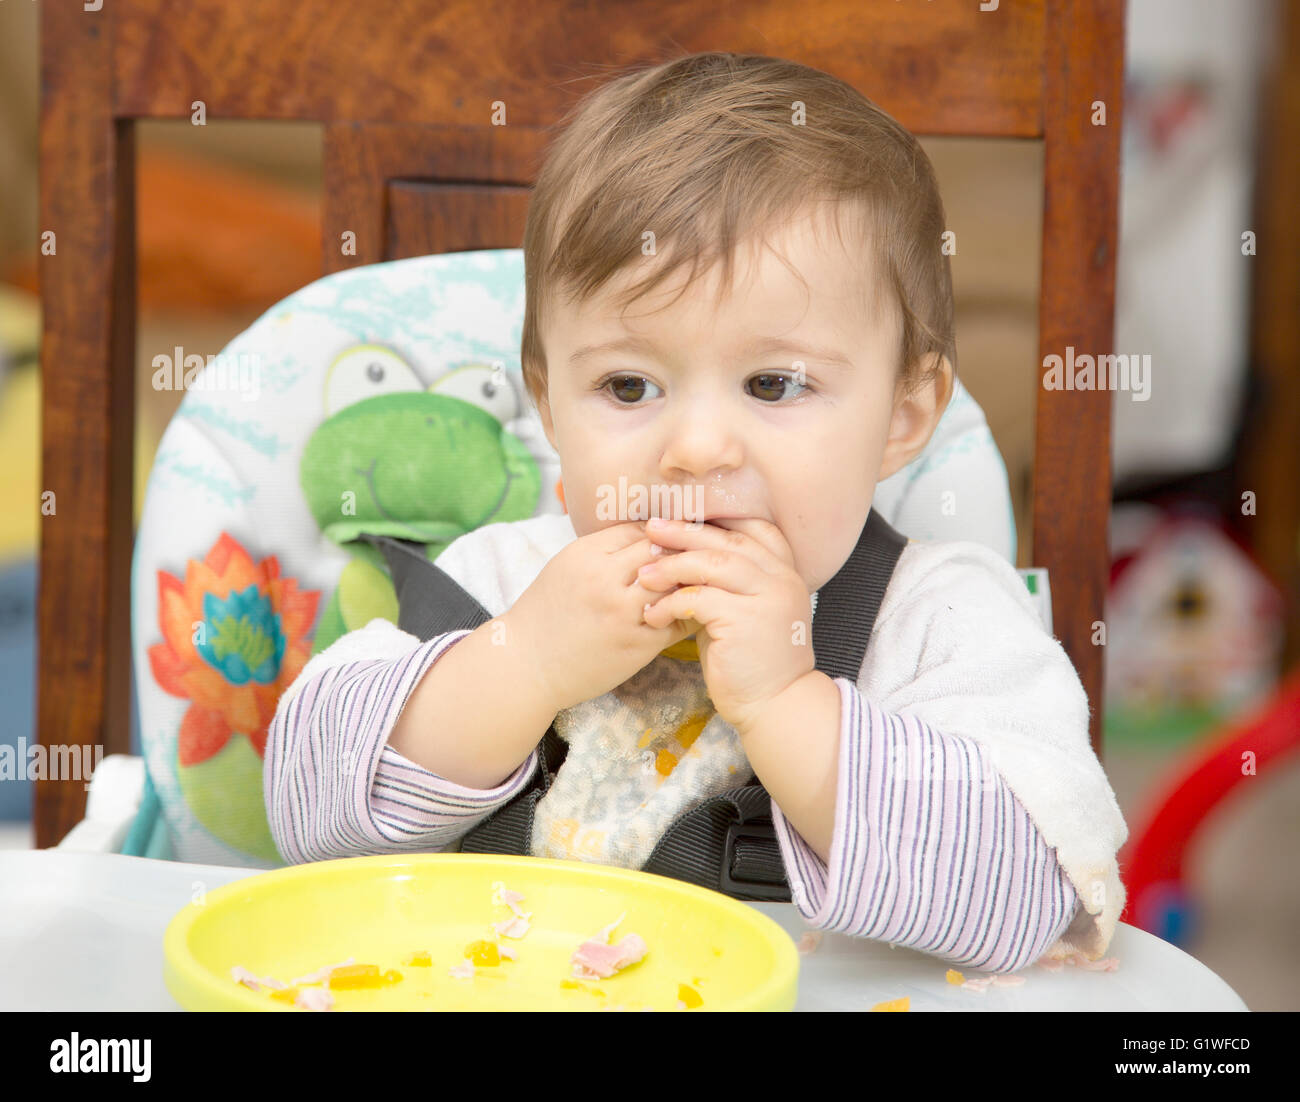 Cute one year old baby sitting at table with plate and eating with hands Stock Photo